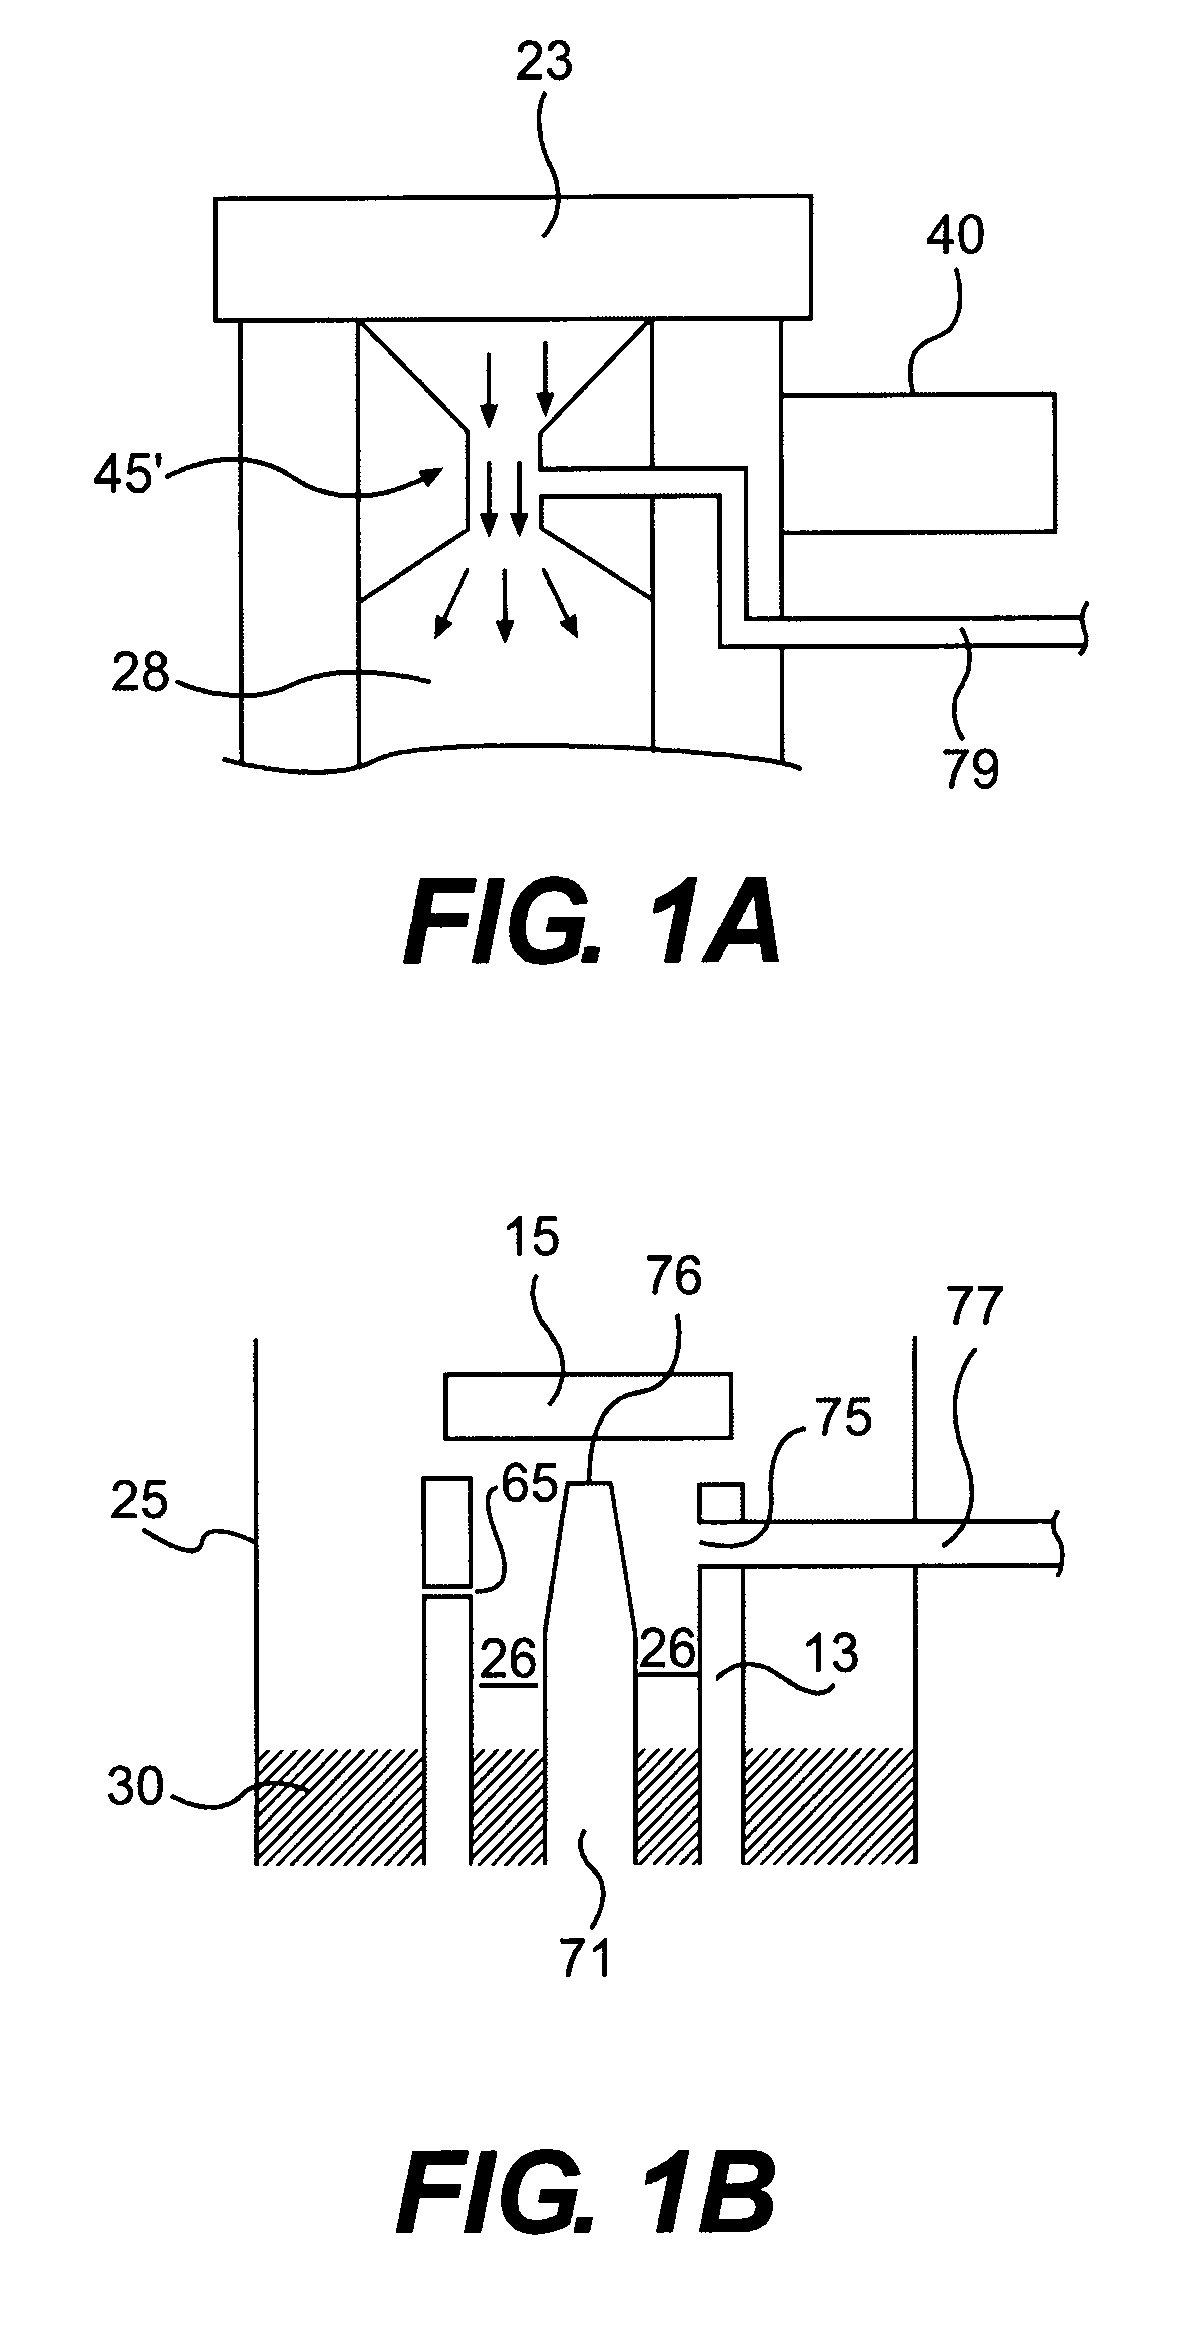 Nebulizer with pressure-based fluidic control and related methods